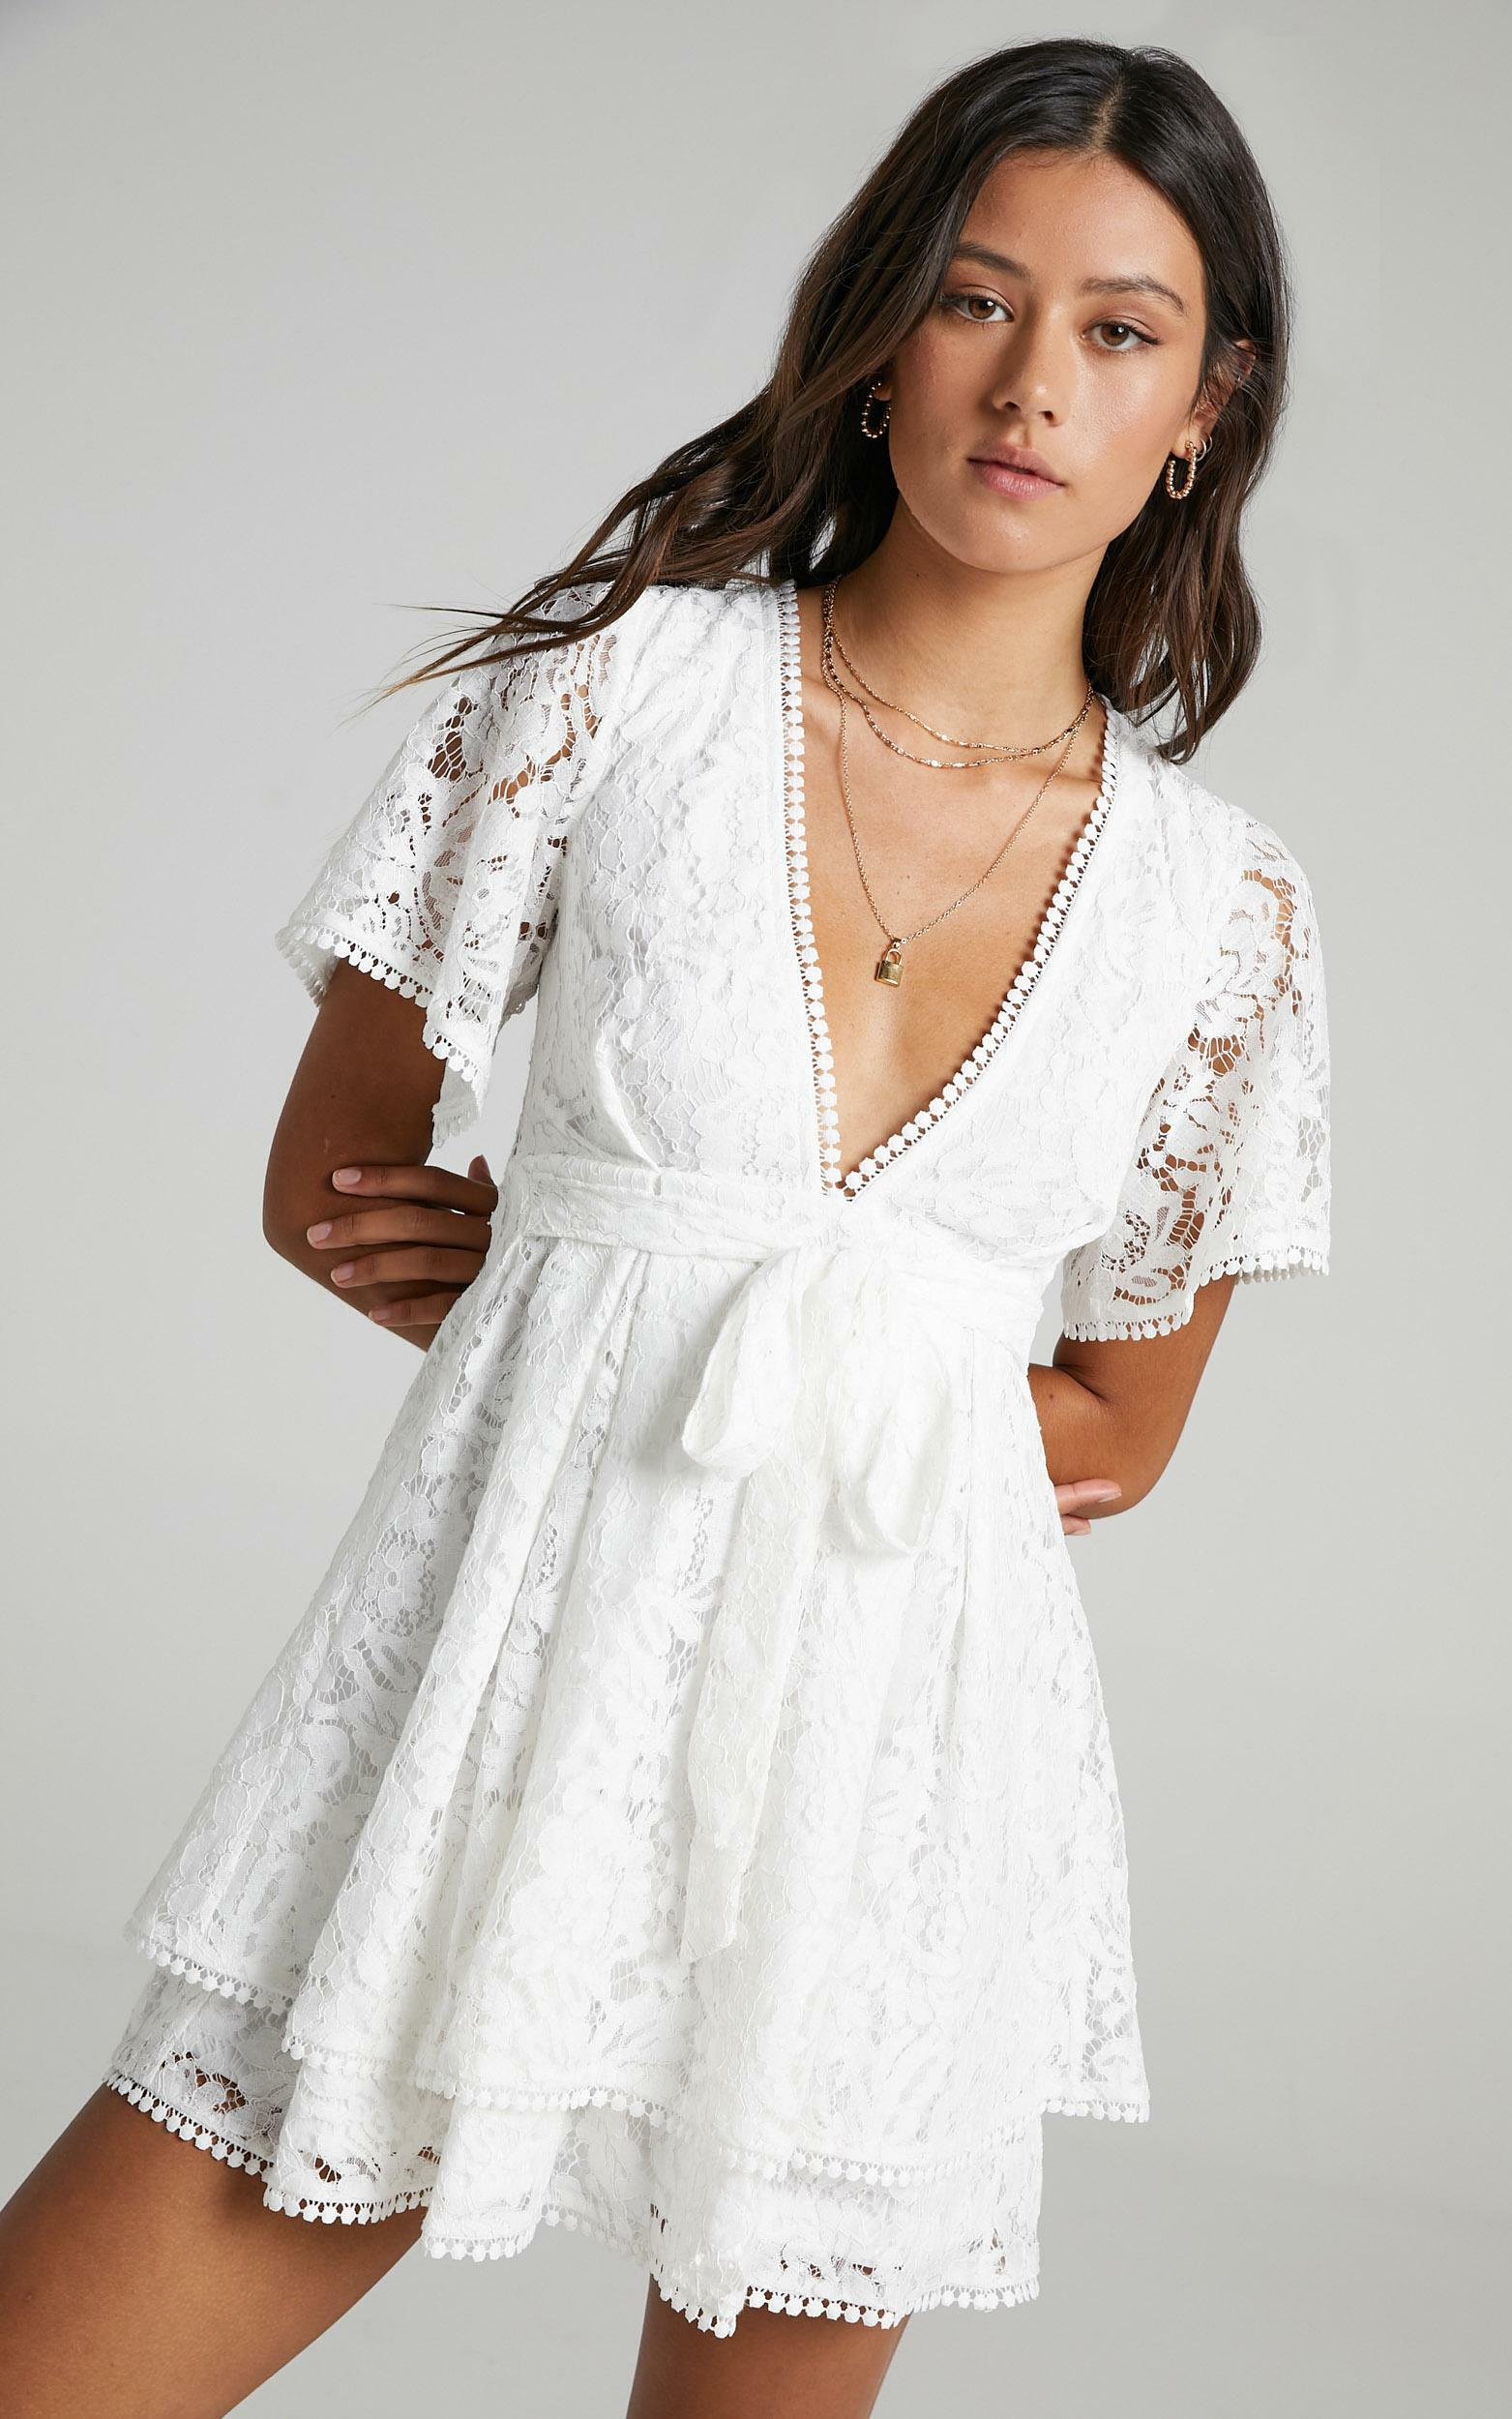 Do You Miss Me Dress in White Lace - 20, WHT3, hi-res image number null